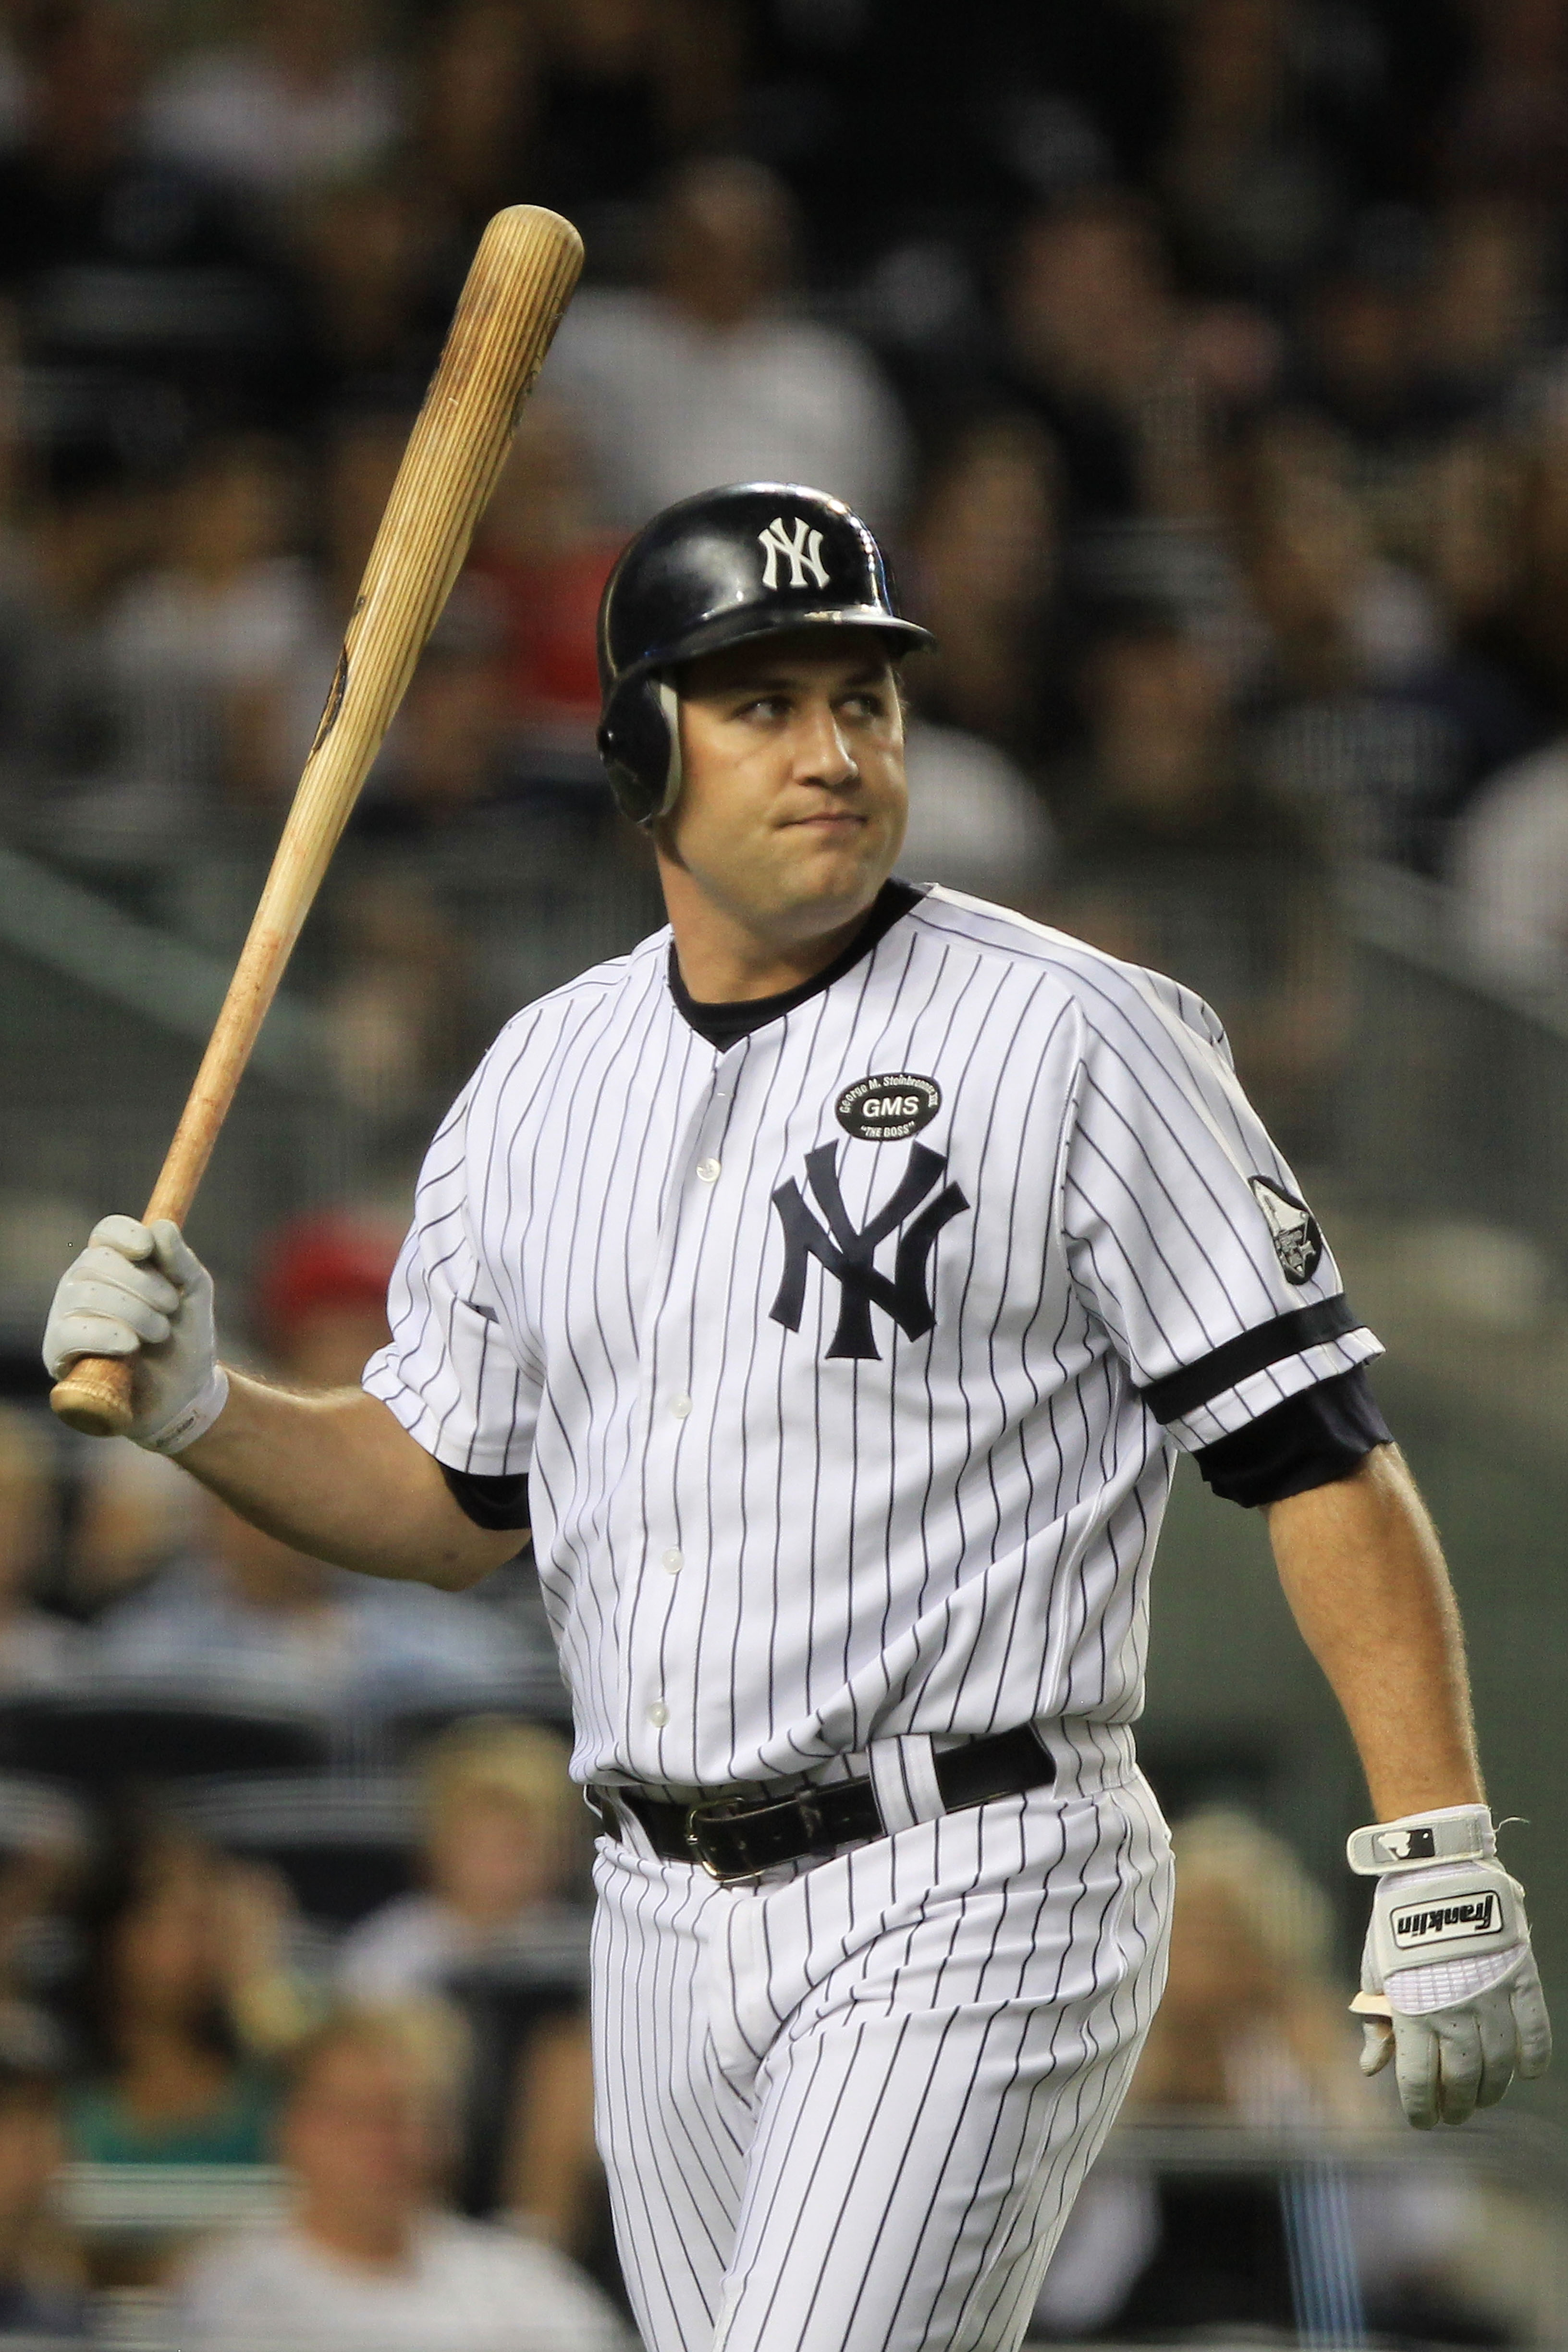 NEW YORK - SEPTEMBER 25: Lance Berkman #17 of the New York Yankees reacts after getting out against the Boston Red Sox during their game on September 25, 2010 at Yankee Stadium in the Bronx borough of New York City.  (Photo by Chris McGrath/Getty Images)